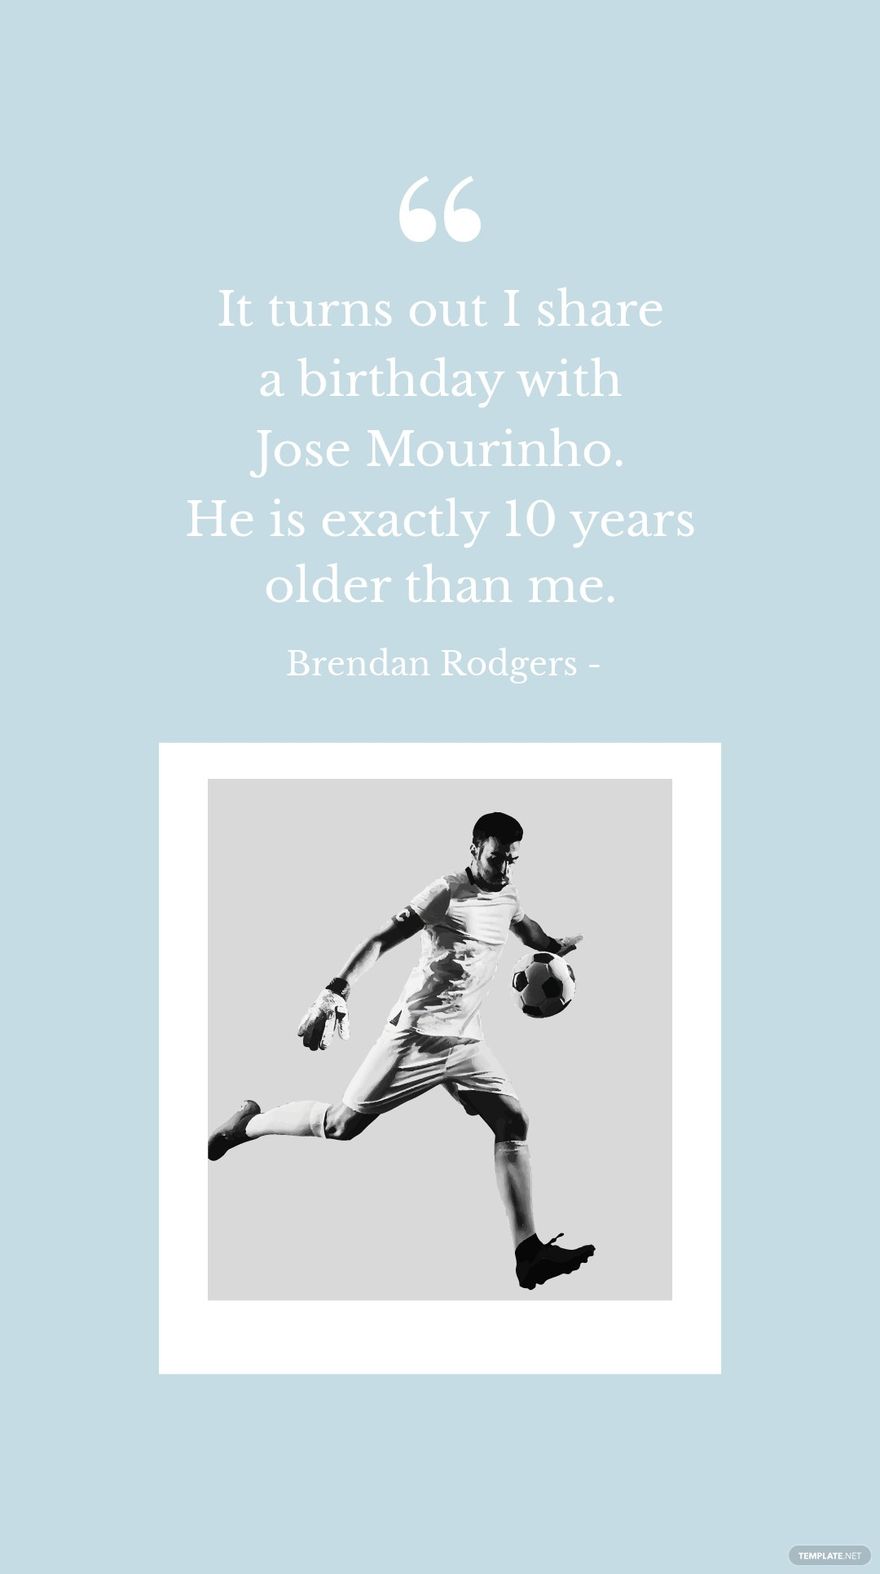 Brendan Rodgers - It turns out I share a birthday with Jose Mourinho. He is exactly 10 years older than me. in JPG